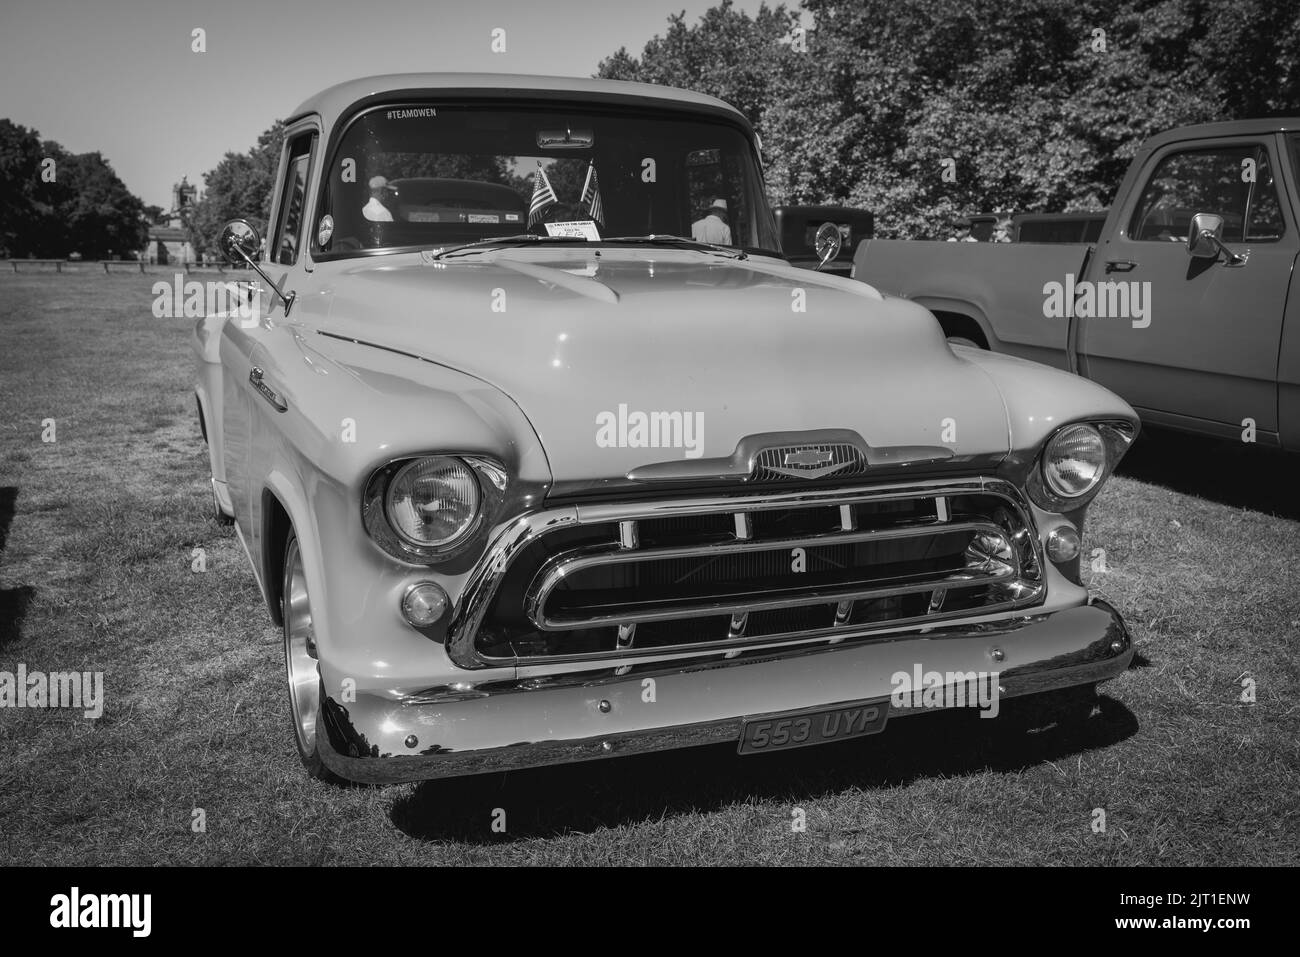 1957 Chevrolet Task Force ‘553 UYP’ on display at the American Auto Club Rally of the Giants, held at Blenheim Palace on the 10th July 2022 Stock Photo